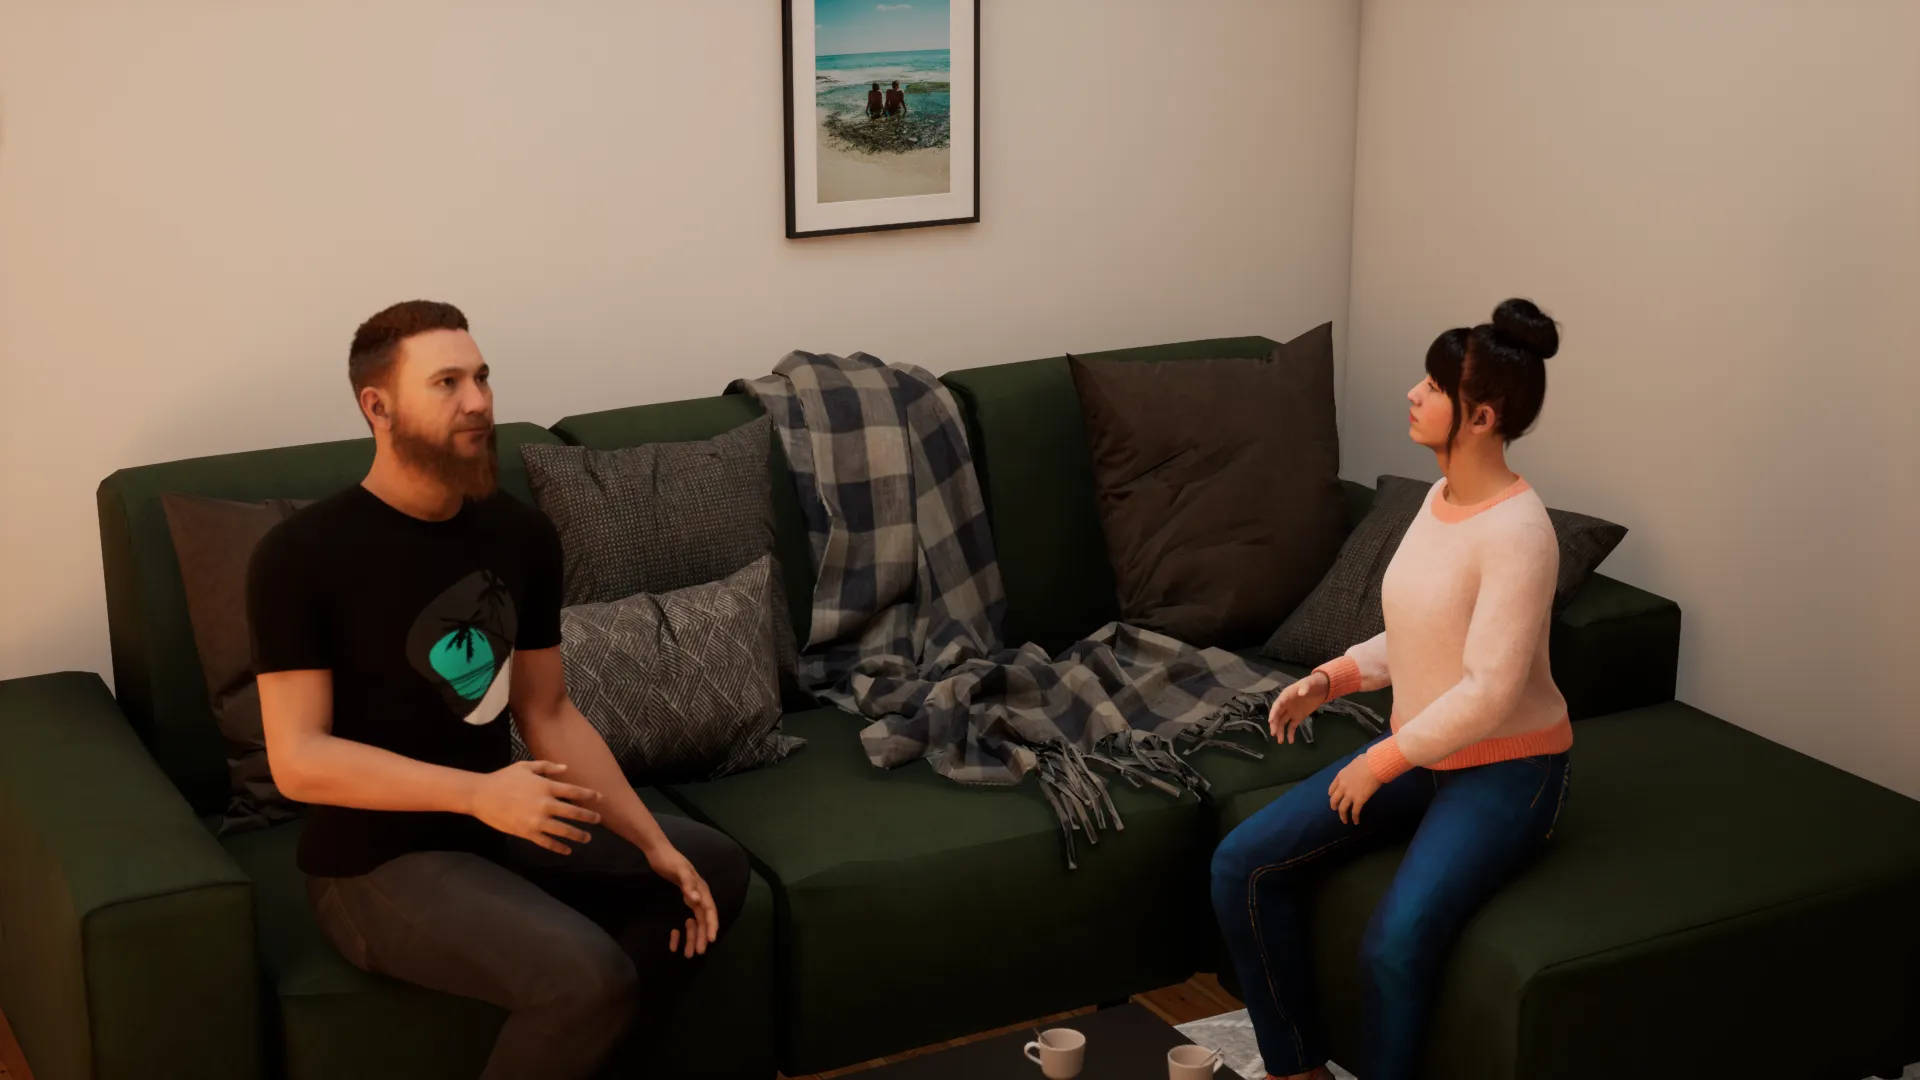 a high resolution render of two vr personas in an interview setting